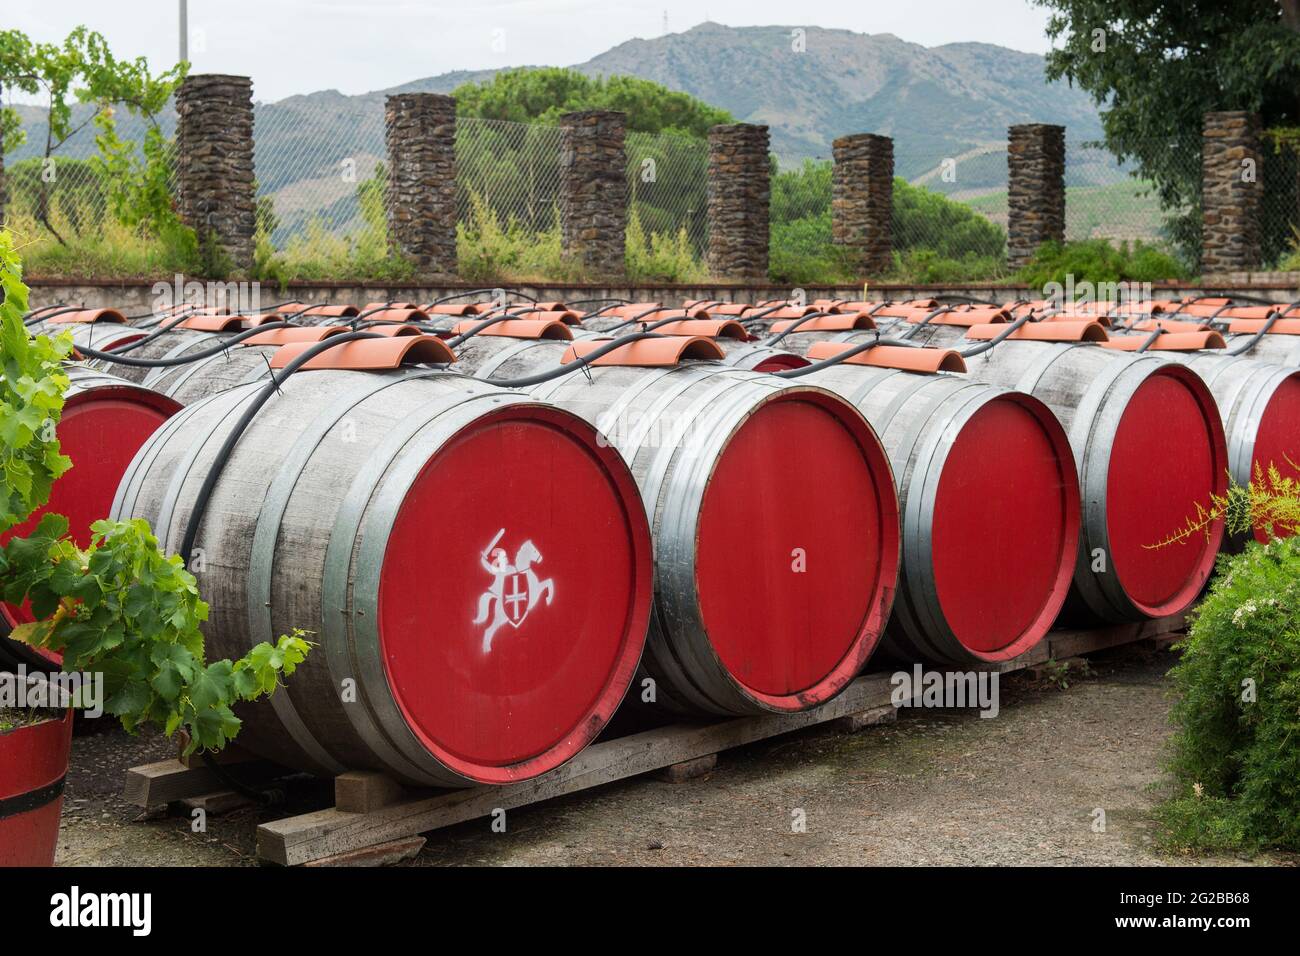 Banyuls sur Mer (south of France): Banyuls and Collioure wine producer 'Terre des Templiers” Stock Photo